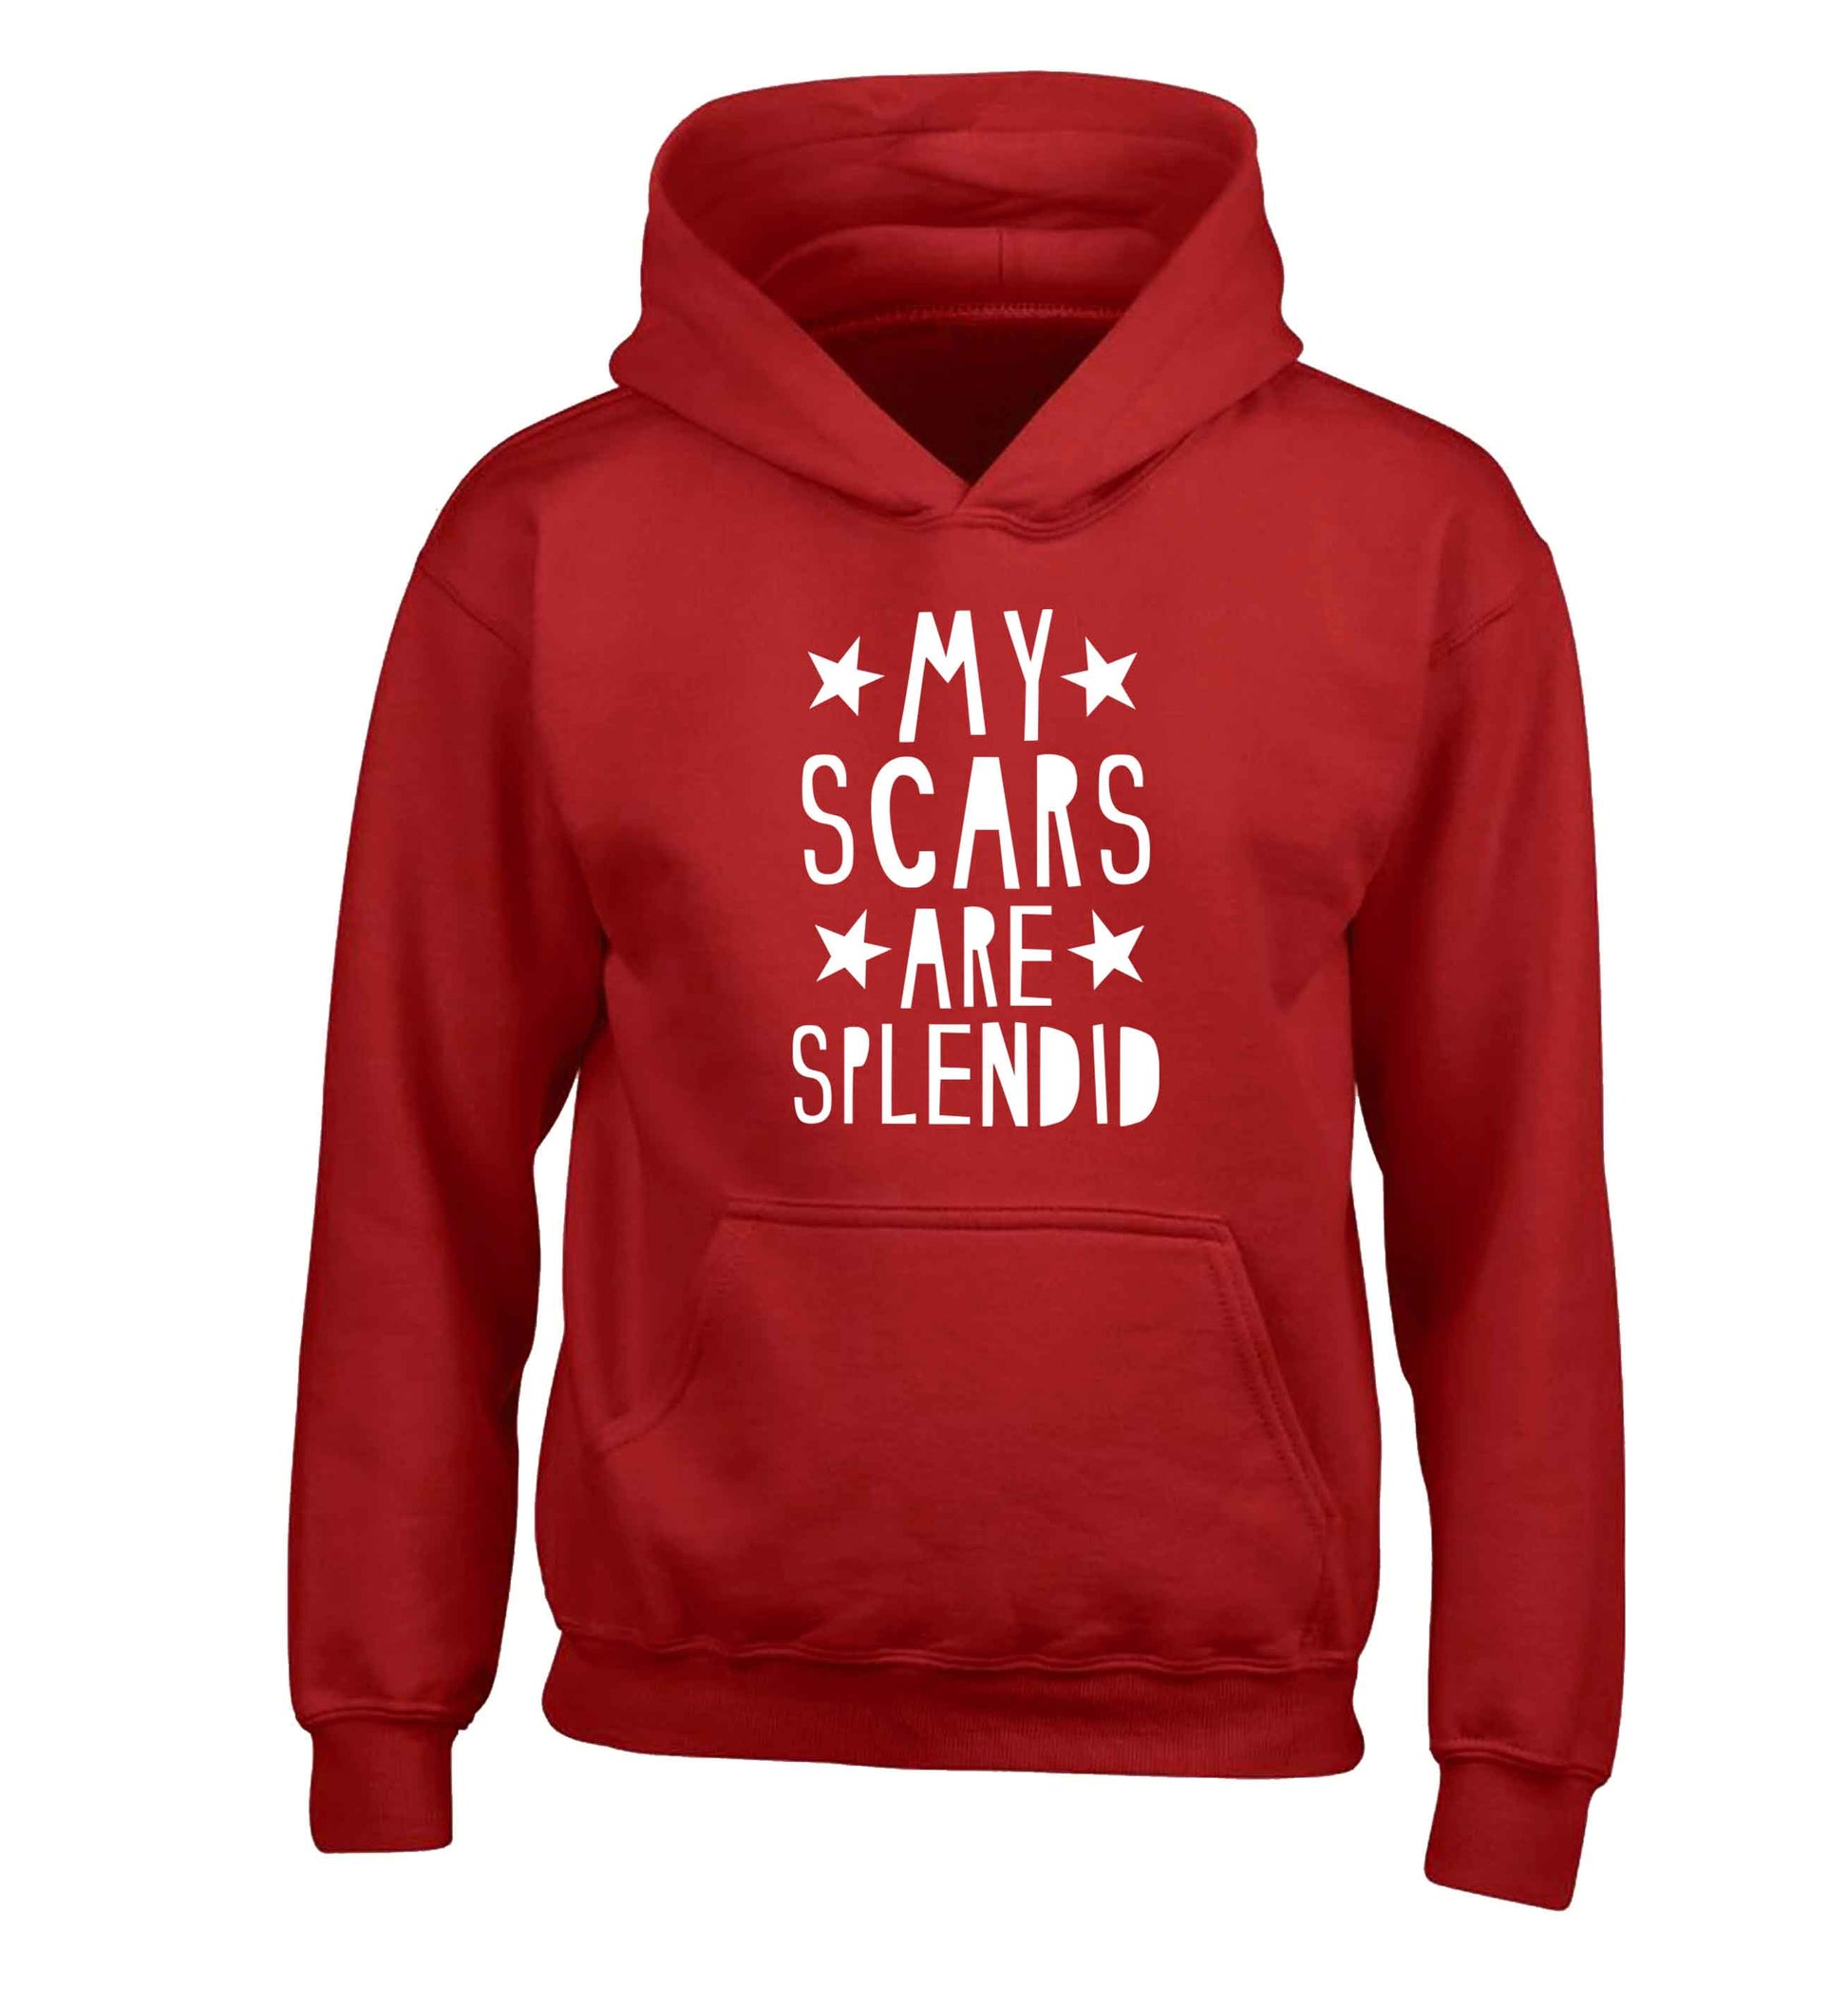 My scars are beautiful children's red hoodie 12-13 Years